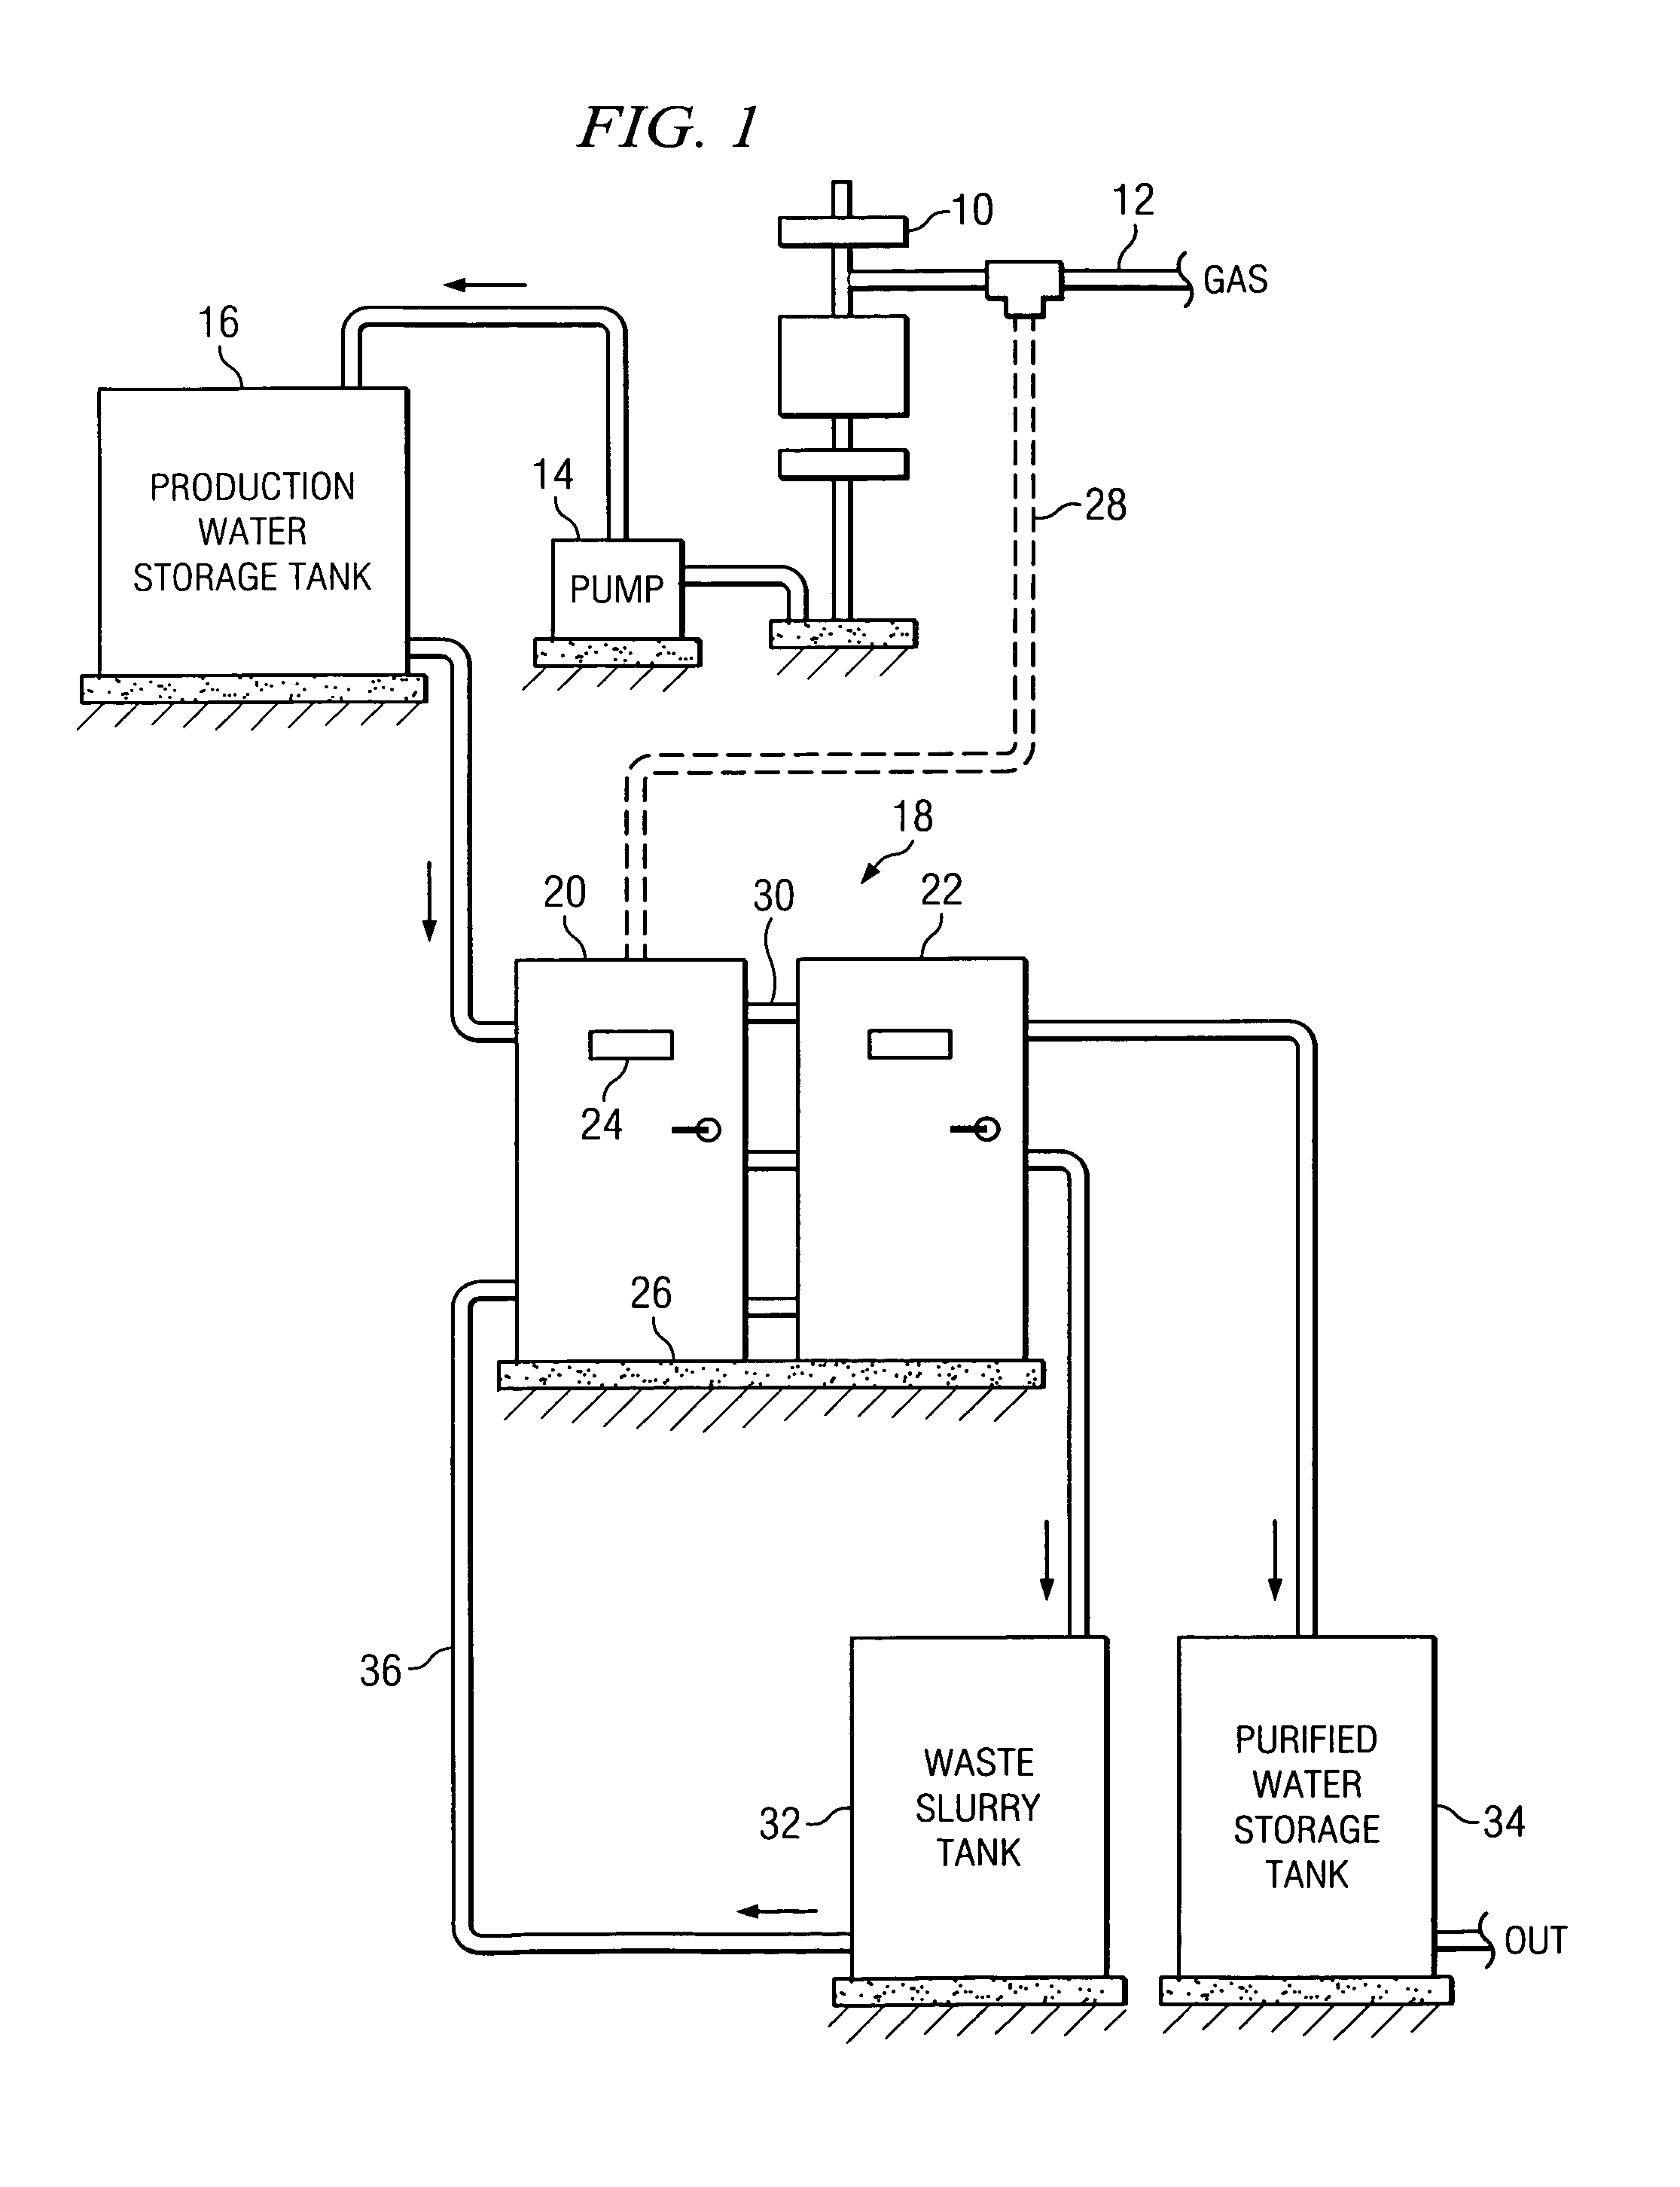 Method and apparatus for purifying water